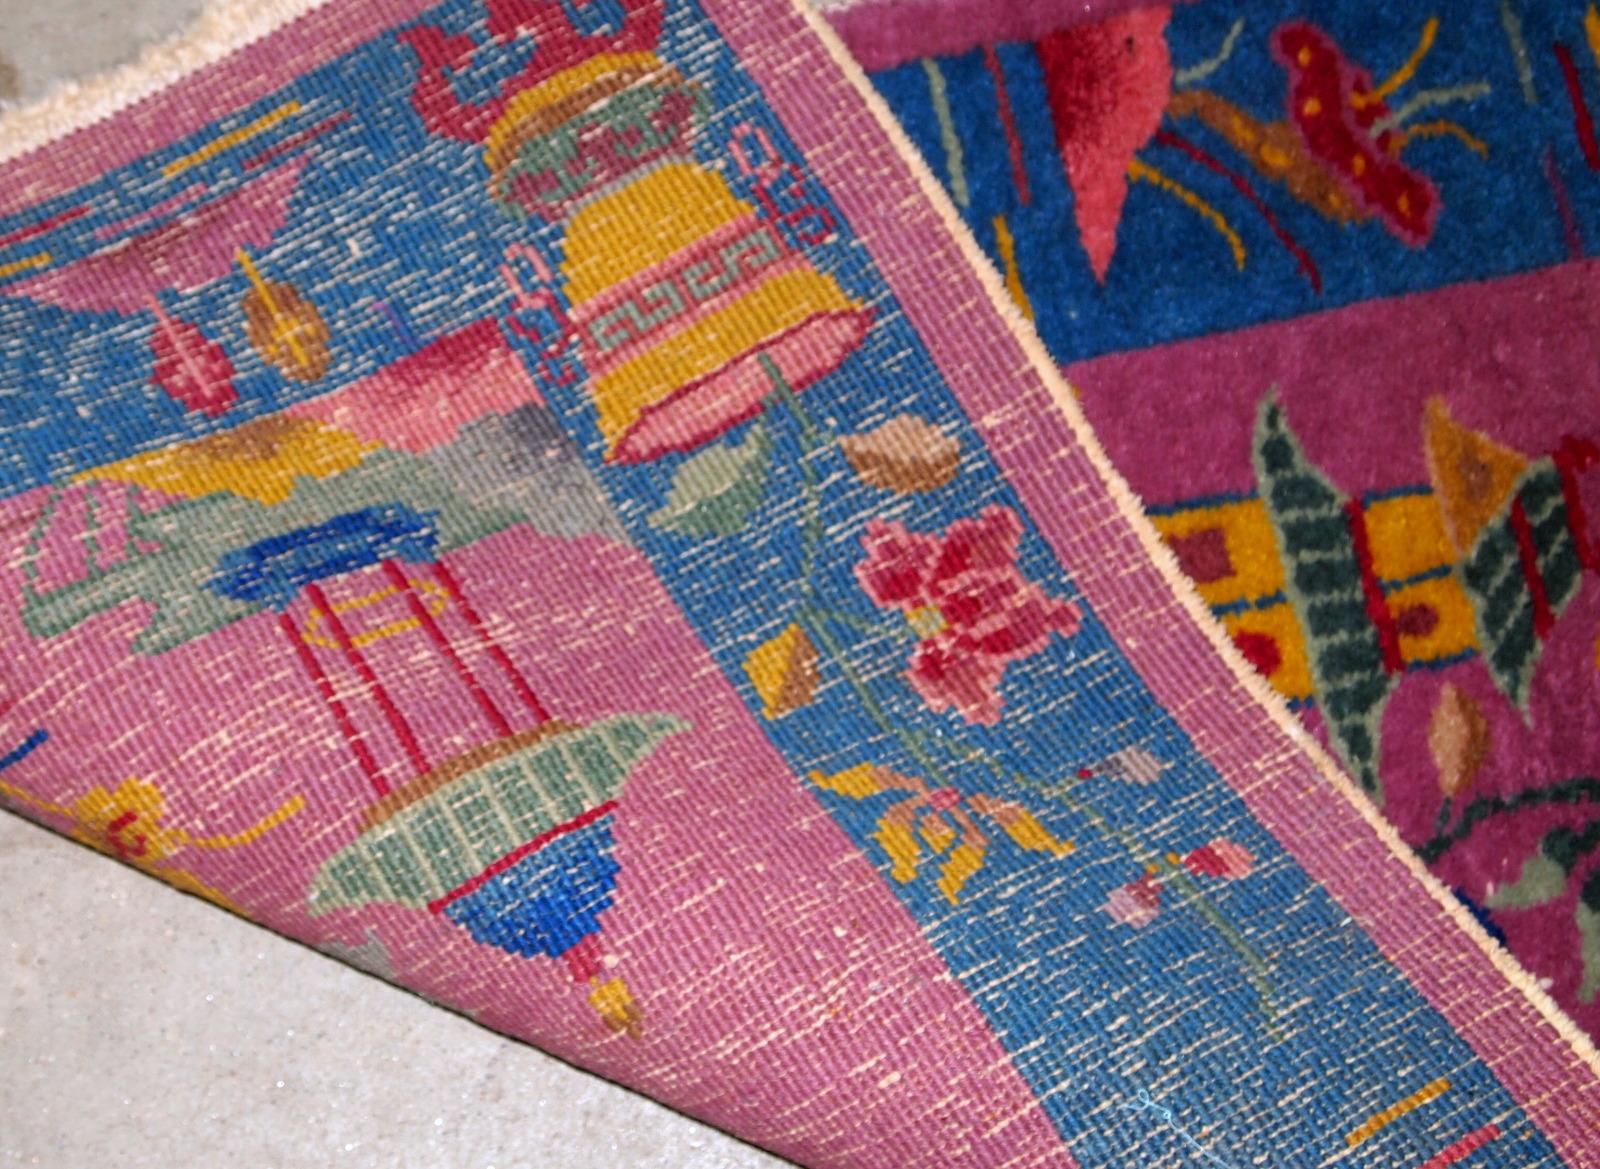 Handmade antique Art Deco Chinese narrow rug. The rug is in original good condition, from the beginning of 20th century.

- Condition: original good,

- circa 1920s,

- Size: 2' x 4.10' (61cm x 150cm),

- Material: wool,

- Country of